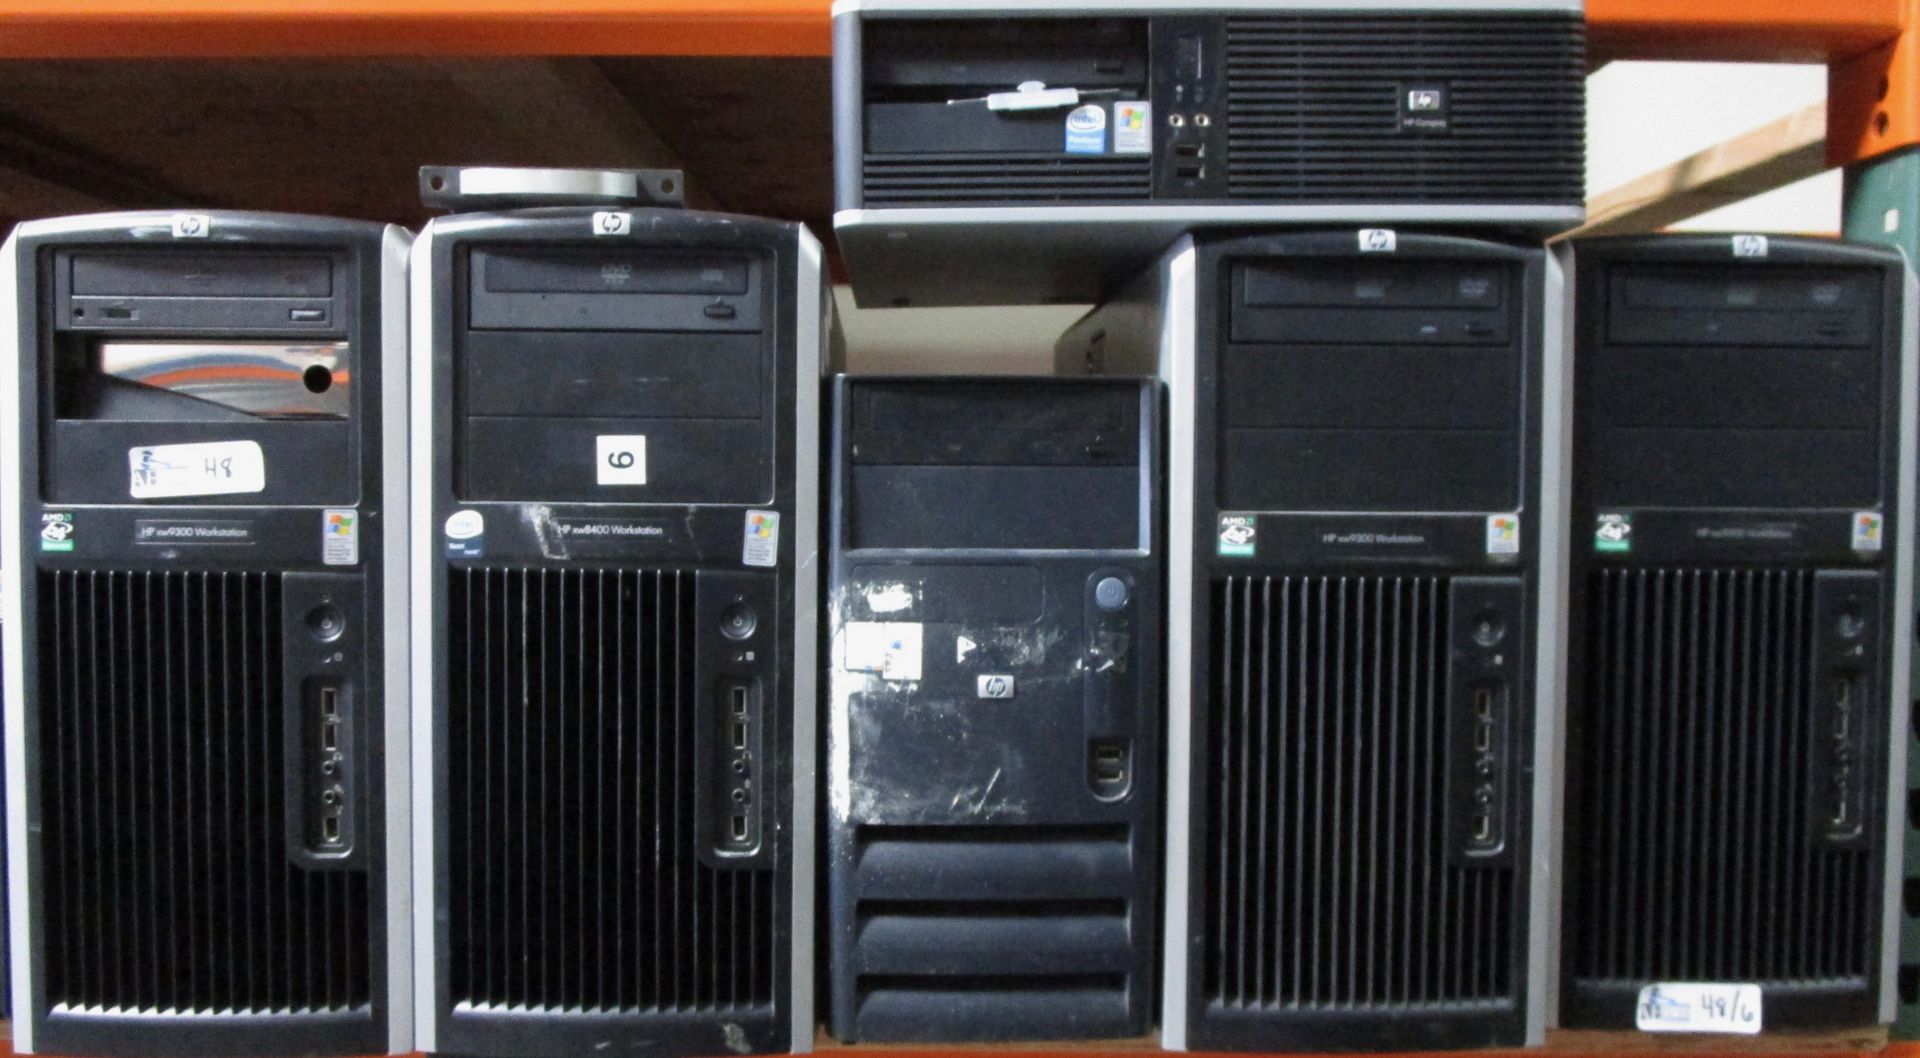 LOT OF 6 COMPUTERS